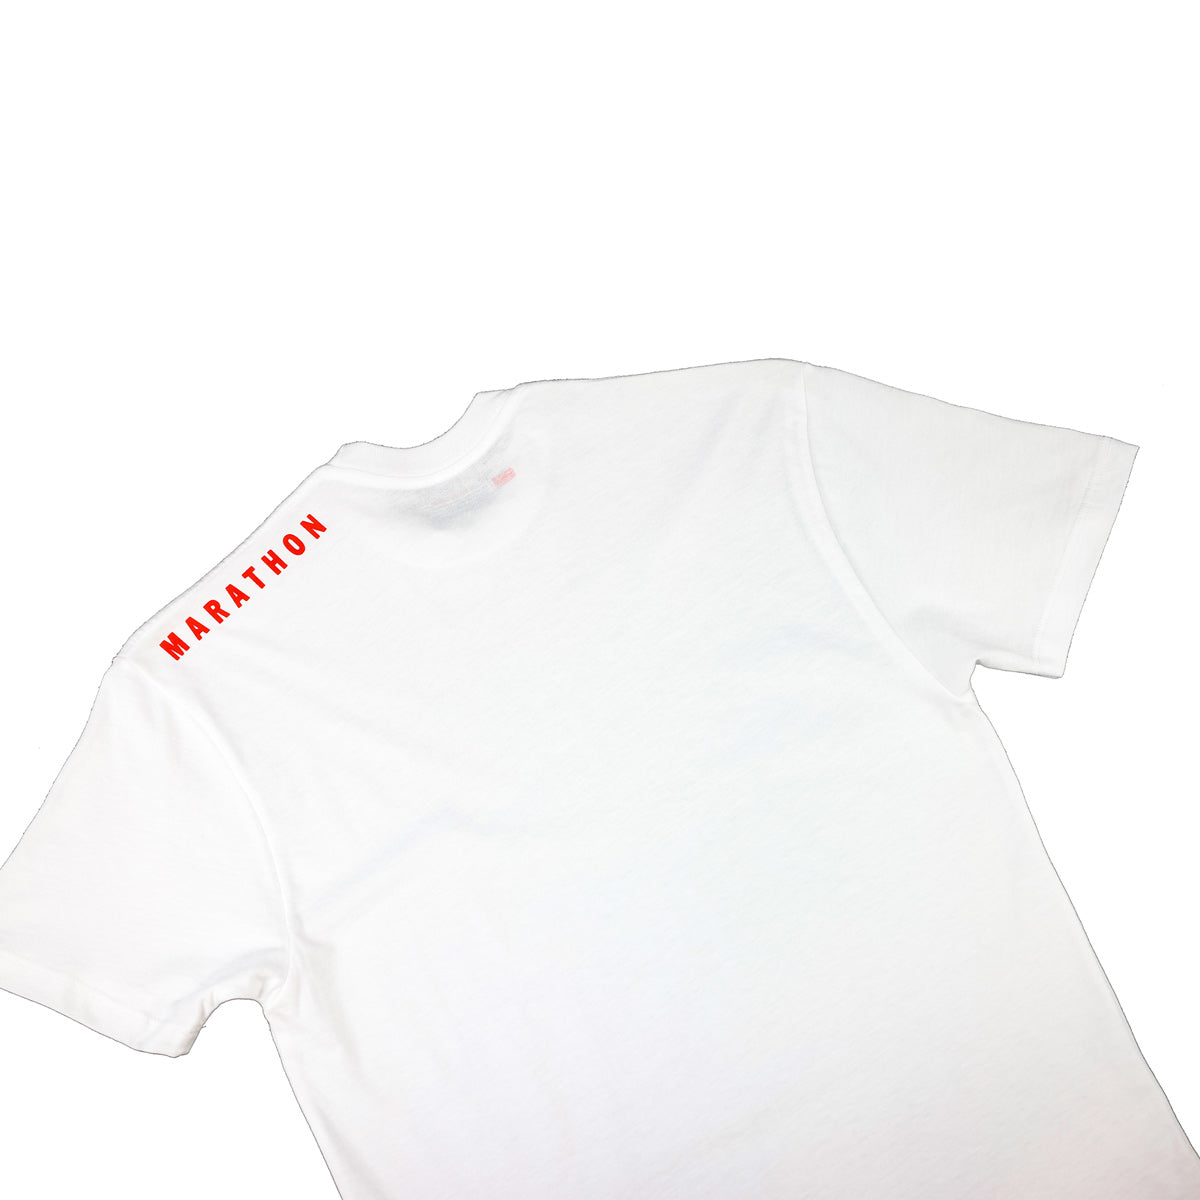 Marathon Shoulder T-Shirt (Ultra Fitted) - White/Red - Detail 2